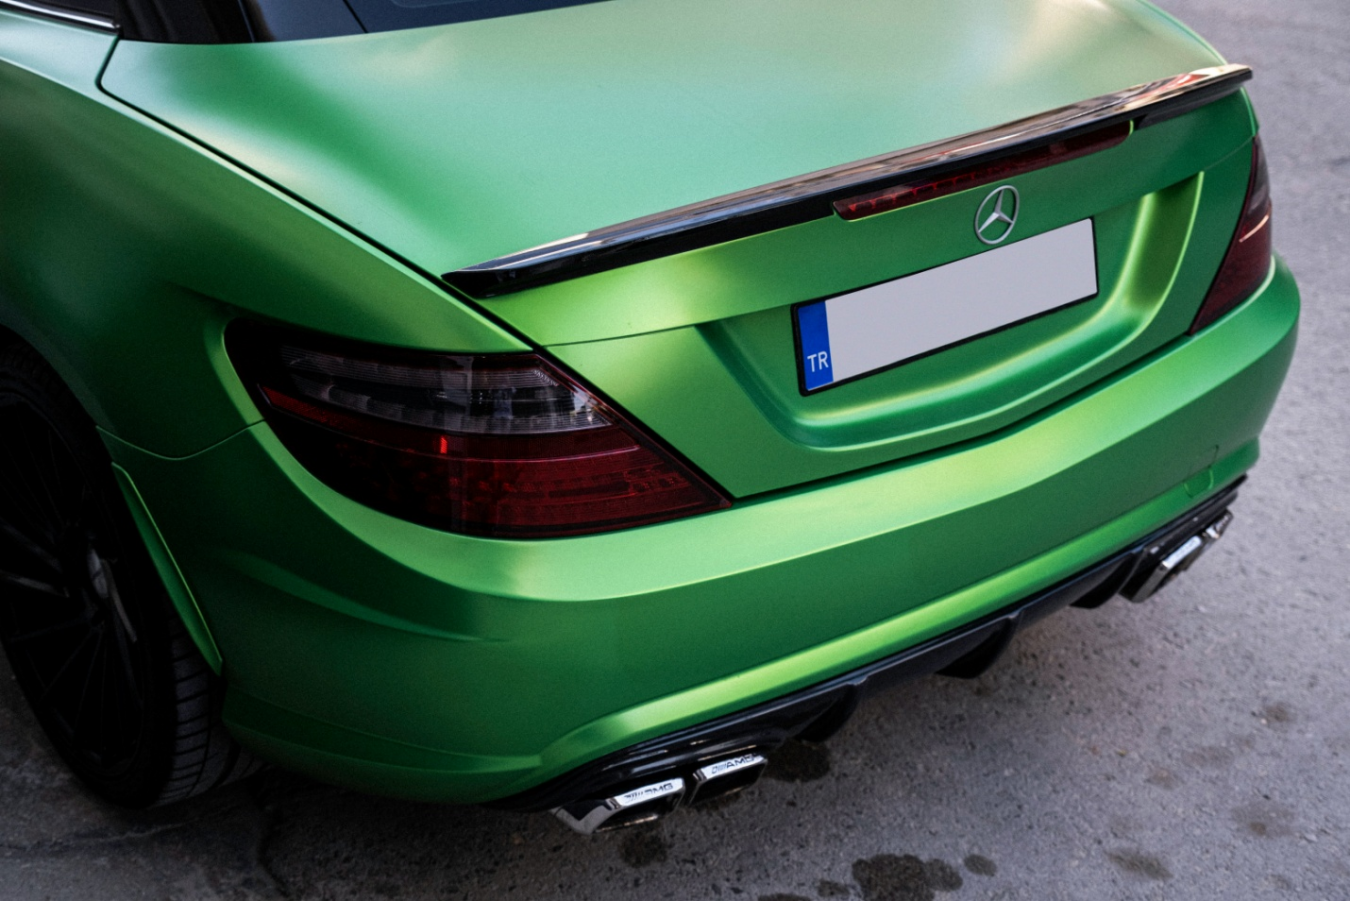 Green Mercedes-Benz car with a glossy green vinyl wrap, showcasing the possibilities of car customization.